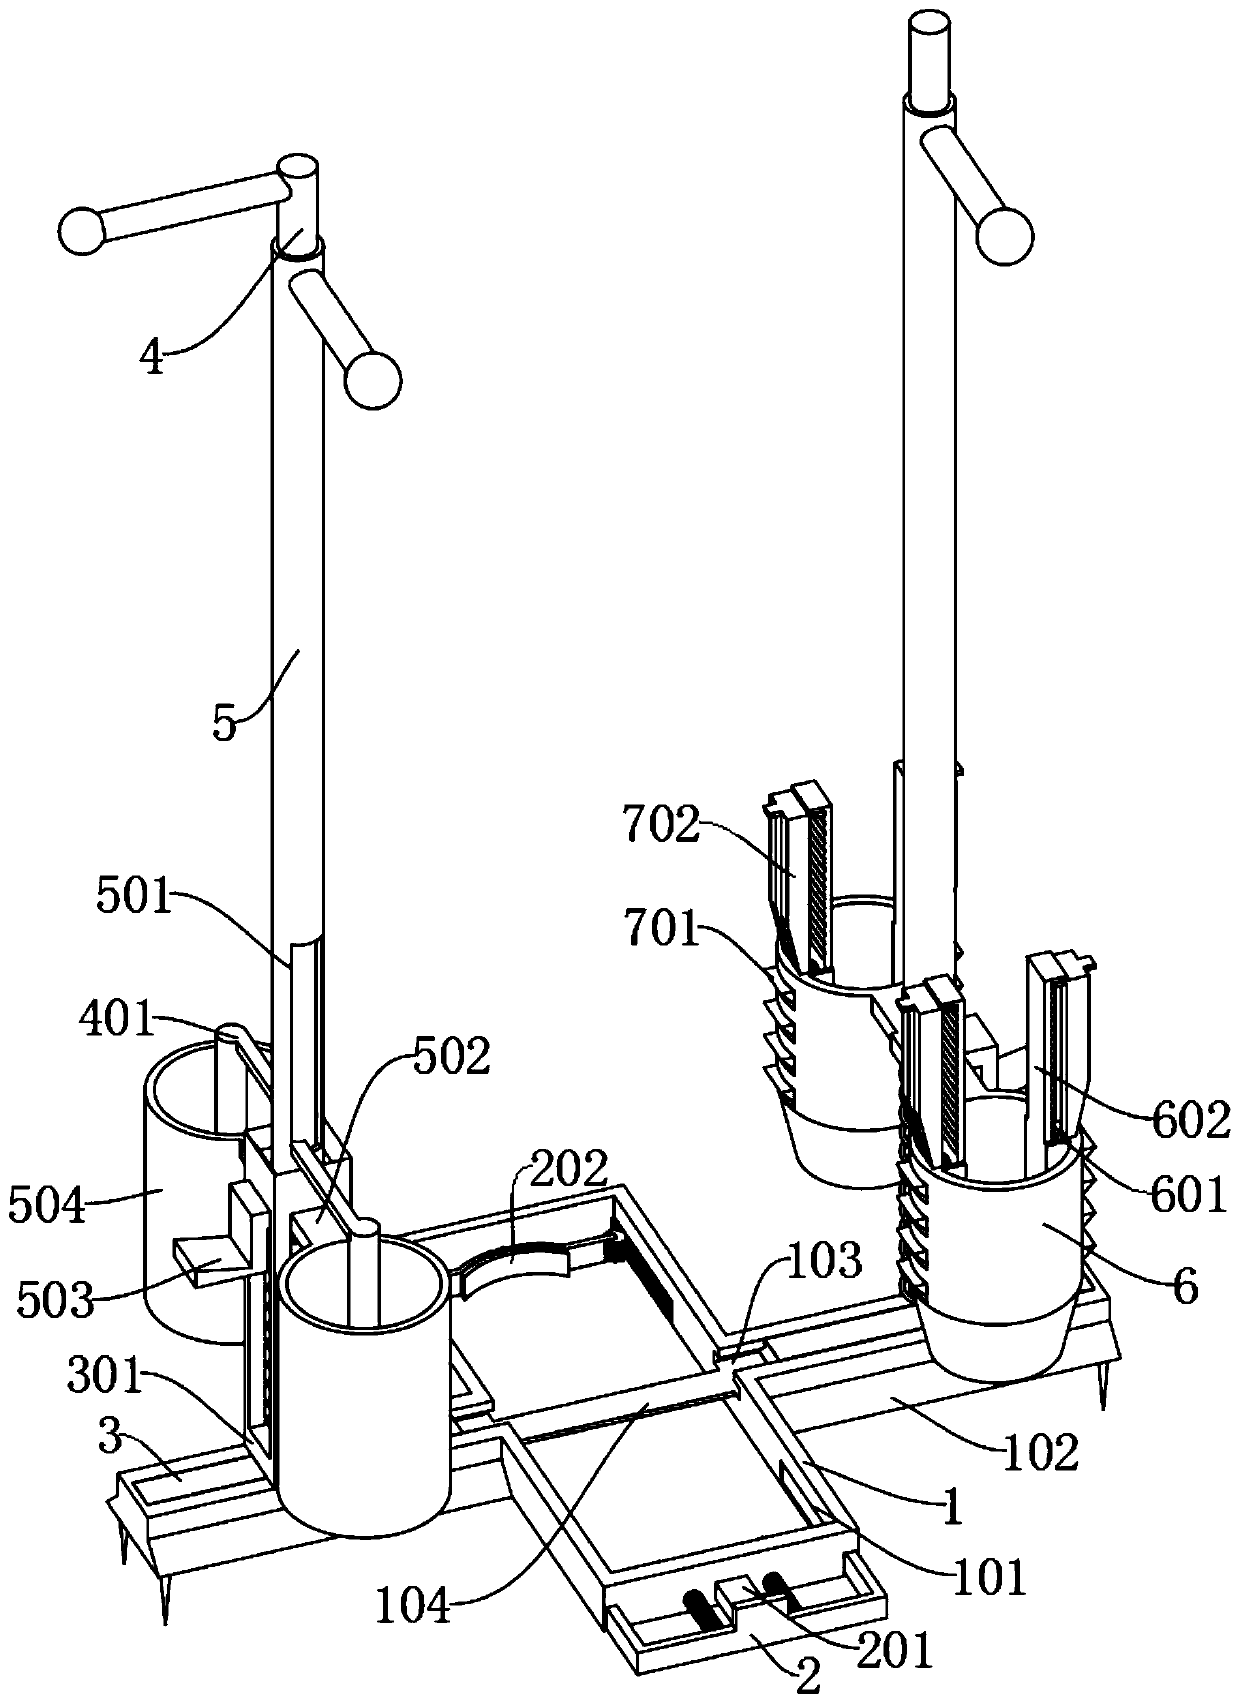 Garden landscape maintenance-based soil film mulching device capable of advancing for flower and plant transplanting